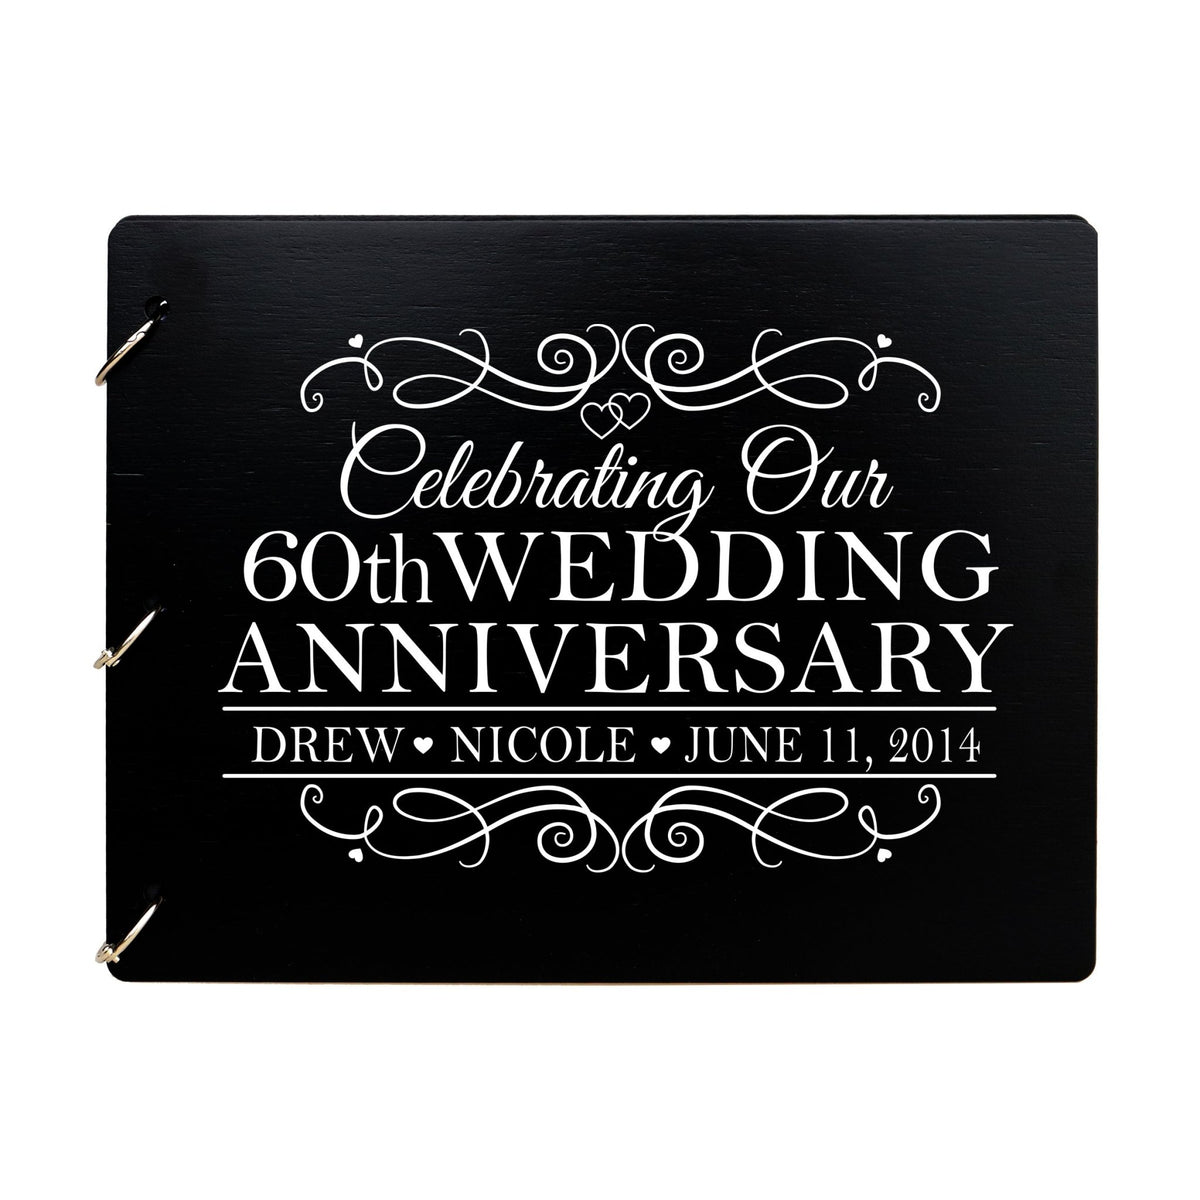 Personalized 60th Wedding Anniversary Guestbook - LifeSong Milestones